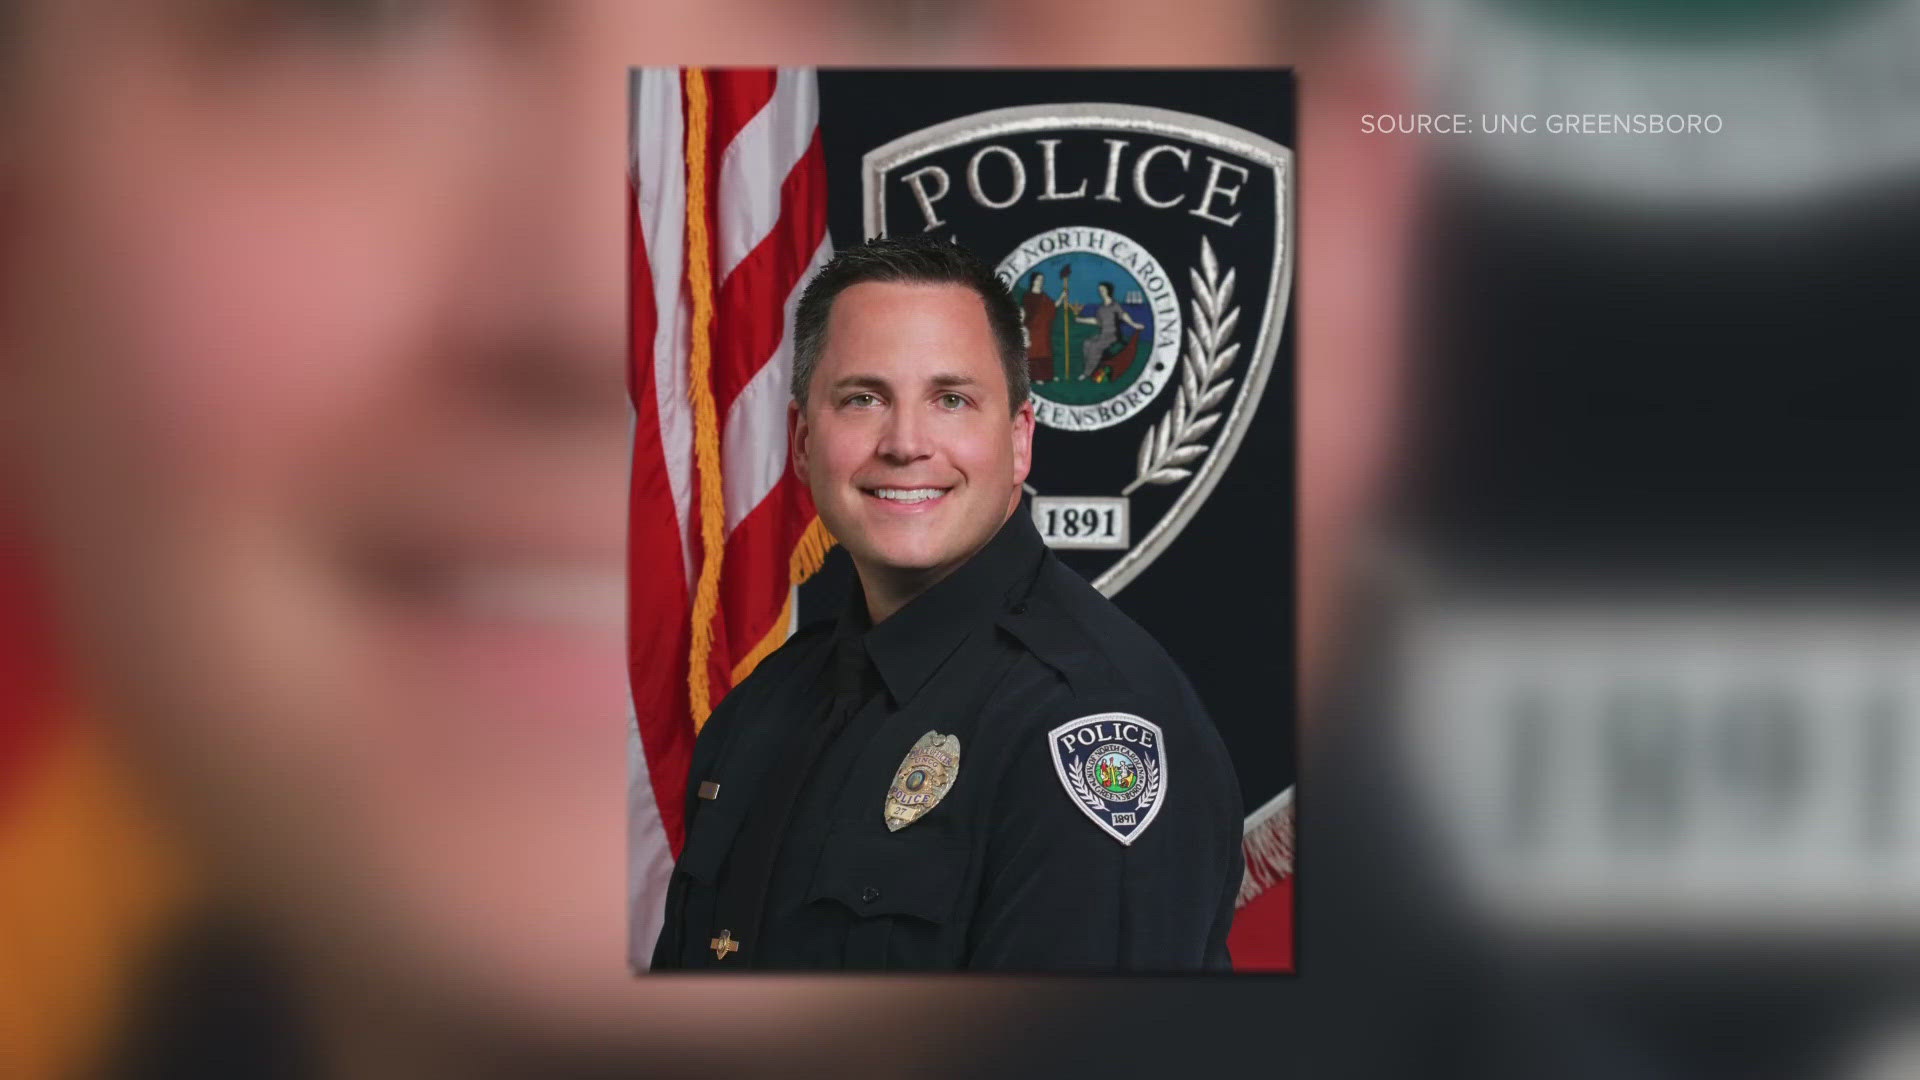 He was described as a "friendly, compassionate and driven law enforcement professional."